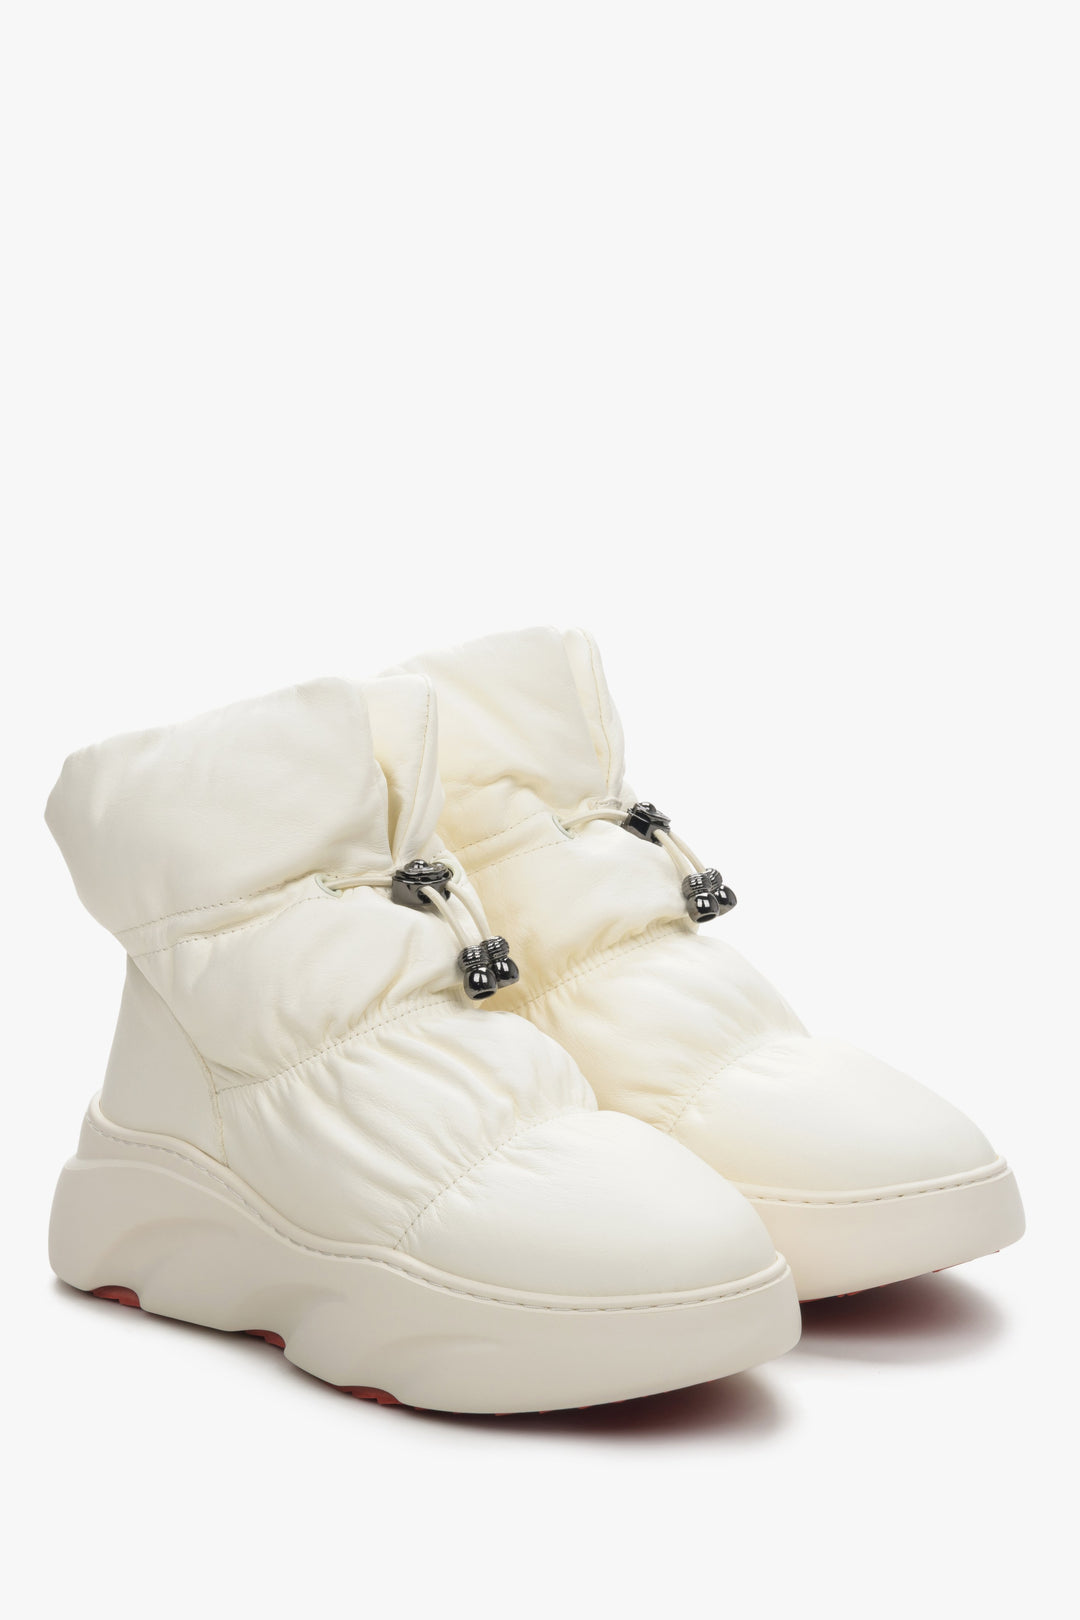 Insulated women's snow boots in light beige color by Estro.